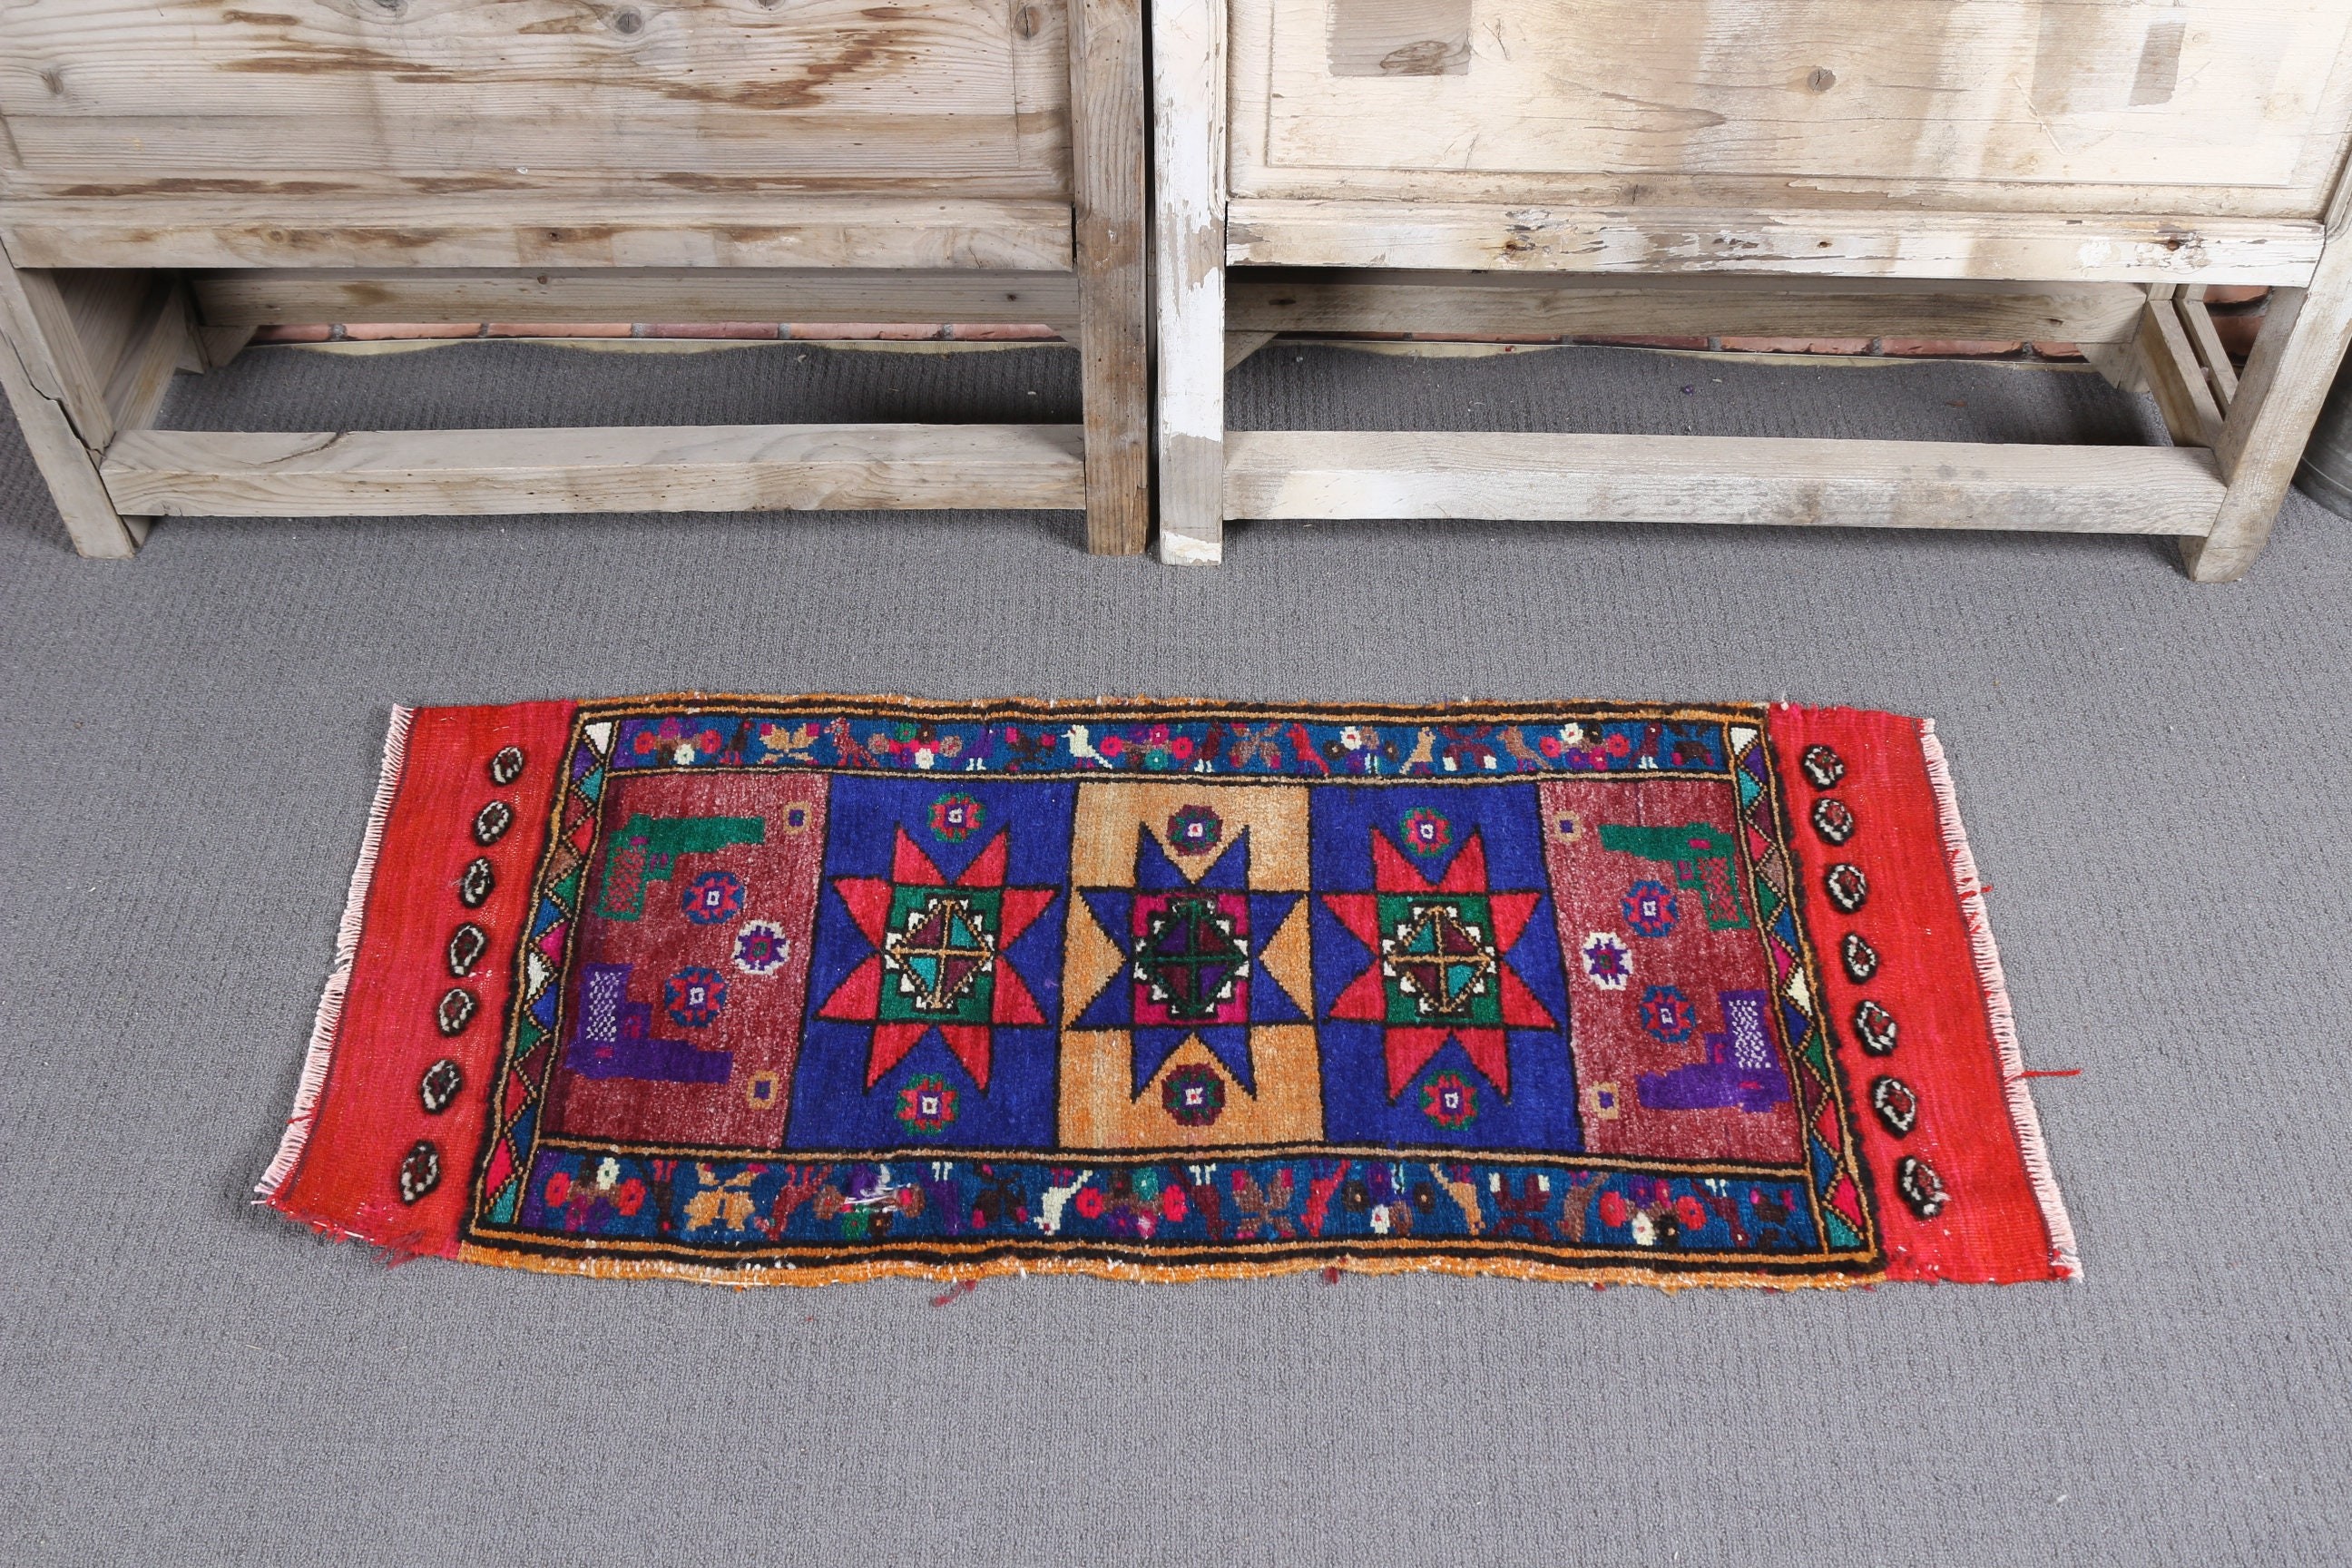 Cool Rug, Rugs for Kitchen, Kitchen Rugs, 1.5x3.3 ft Small Rug, Vintage Rug, Turkish Rugs, Red Cool Rug, Small Area Rug Rugs, Bedroom Rug